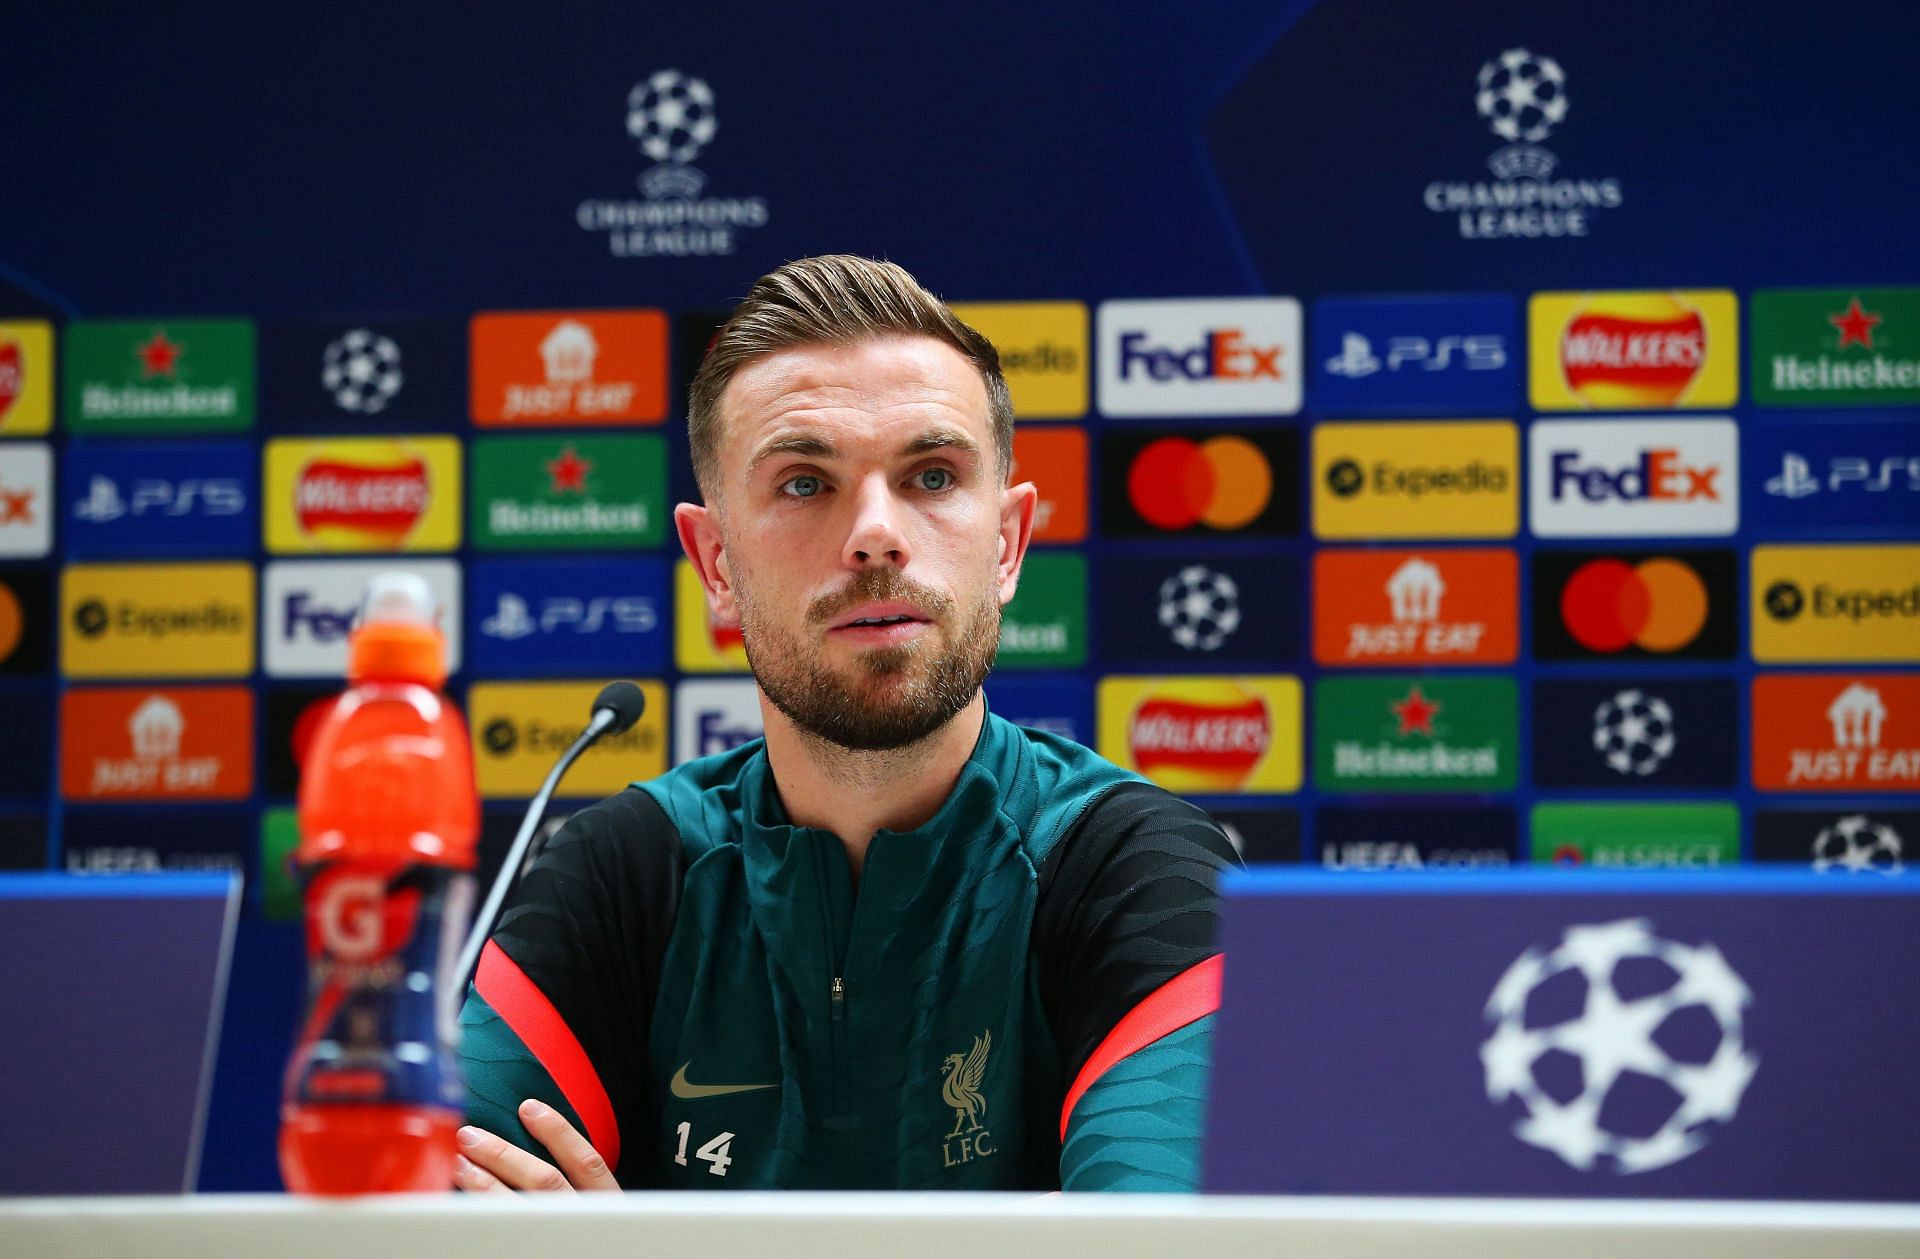 Jordan Henderson is desperate to win another Champions League/